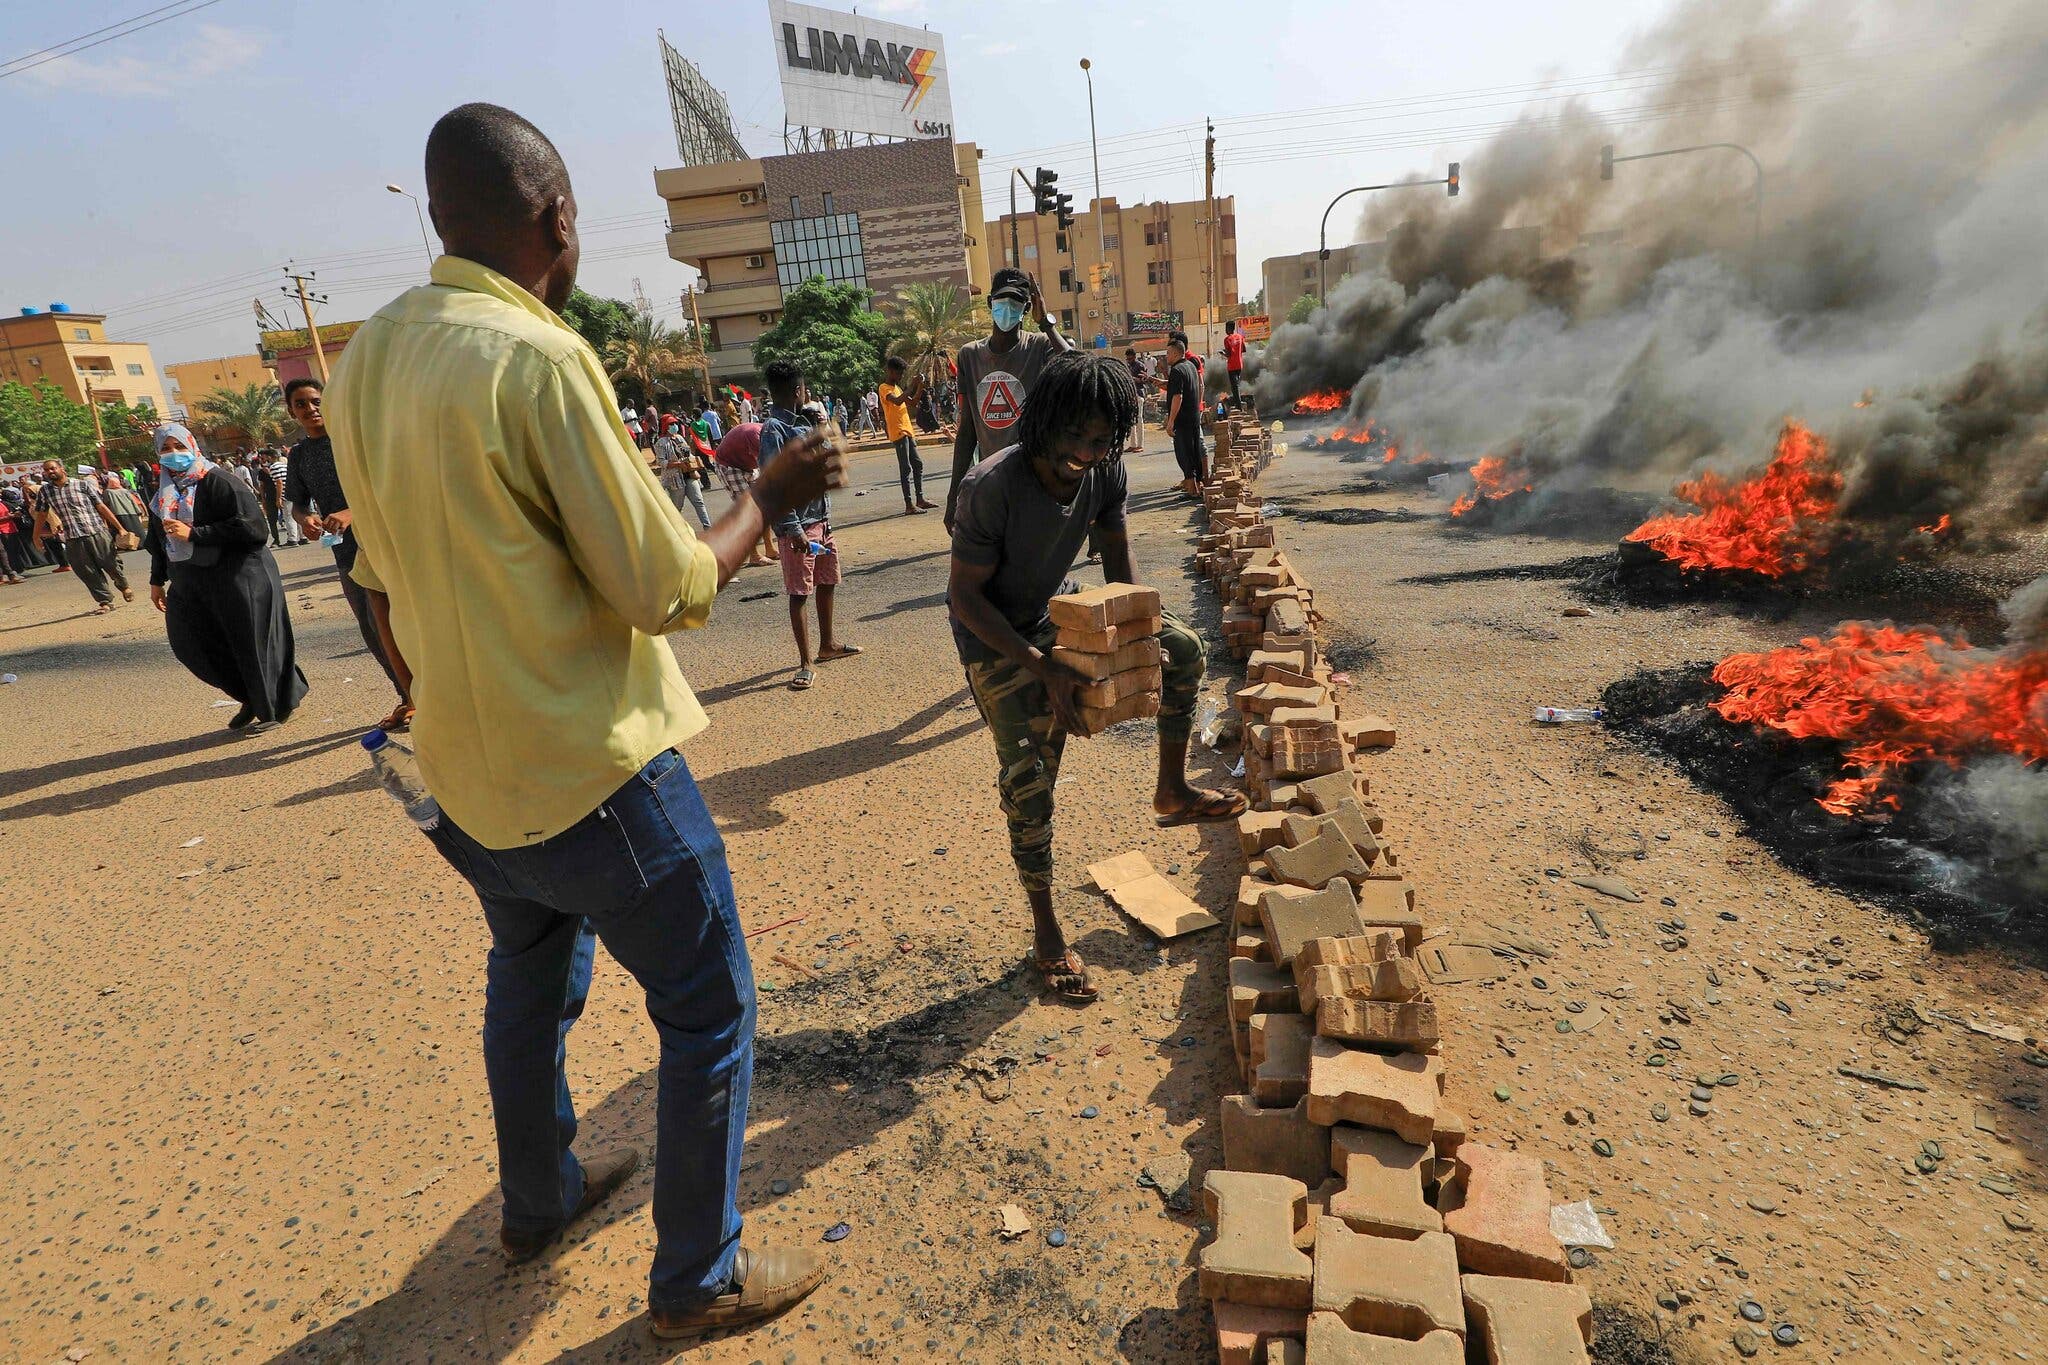 Sudan coup: Military Dissolves Civilian Government And Arrests Leaders